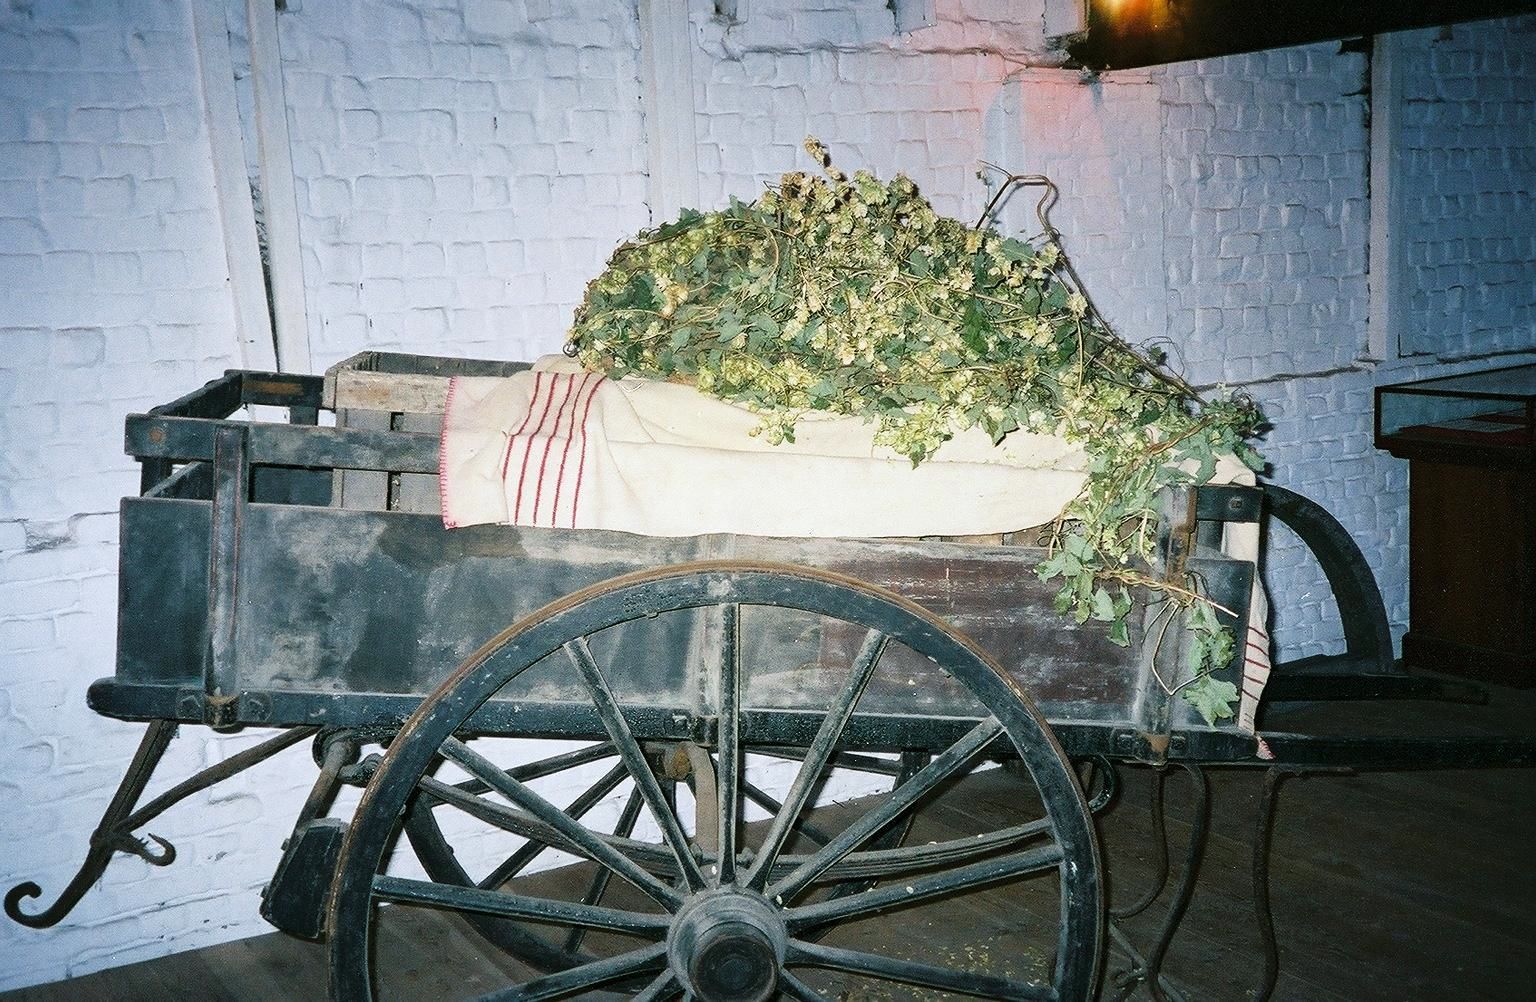 Hops wagon exhibit at Cantillon Brewery, Brussels. My own photo.